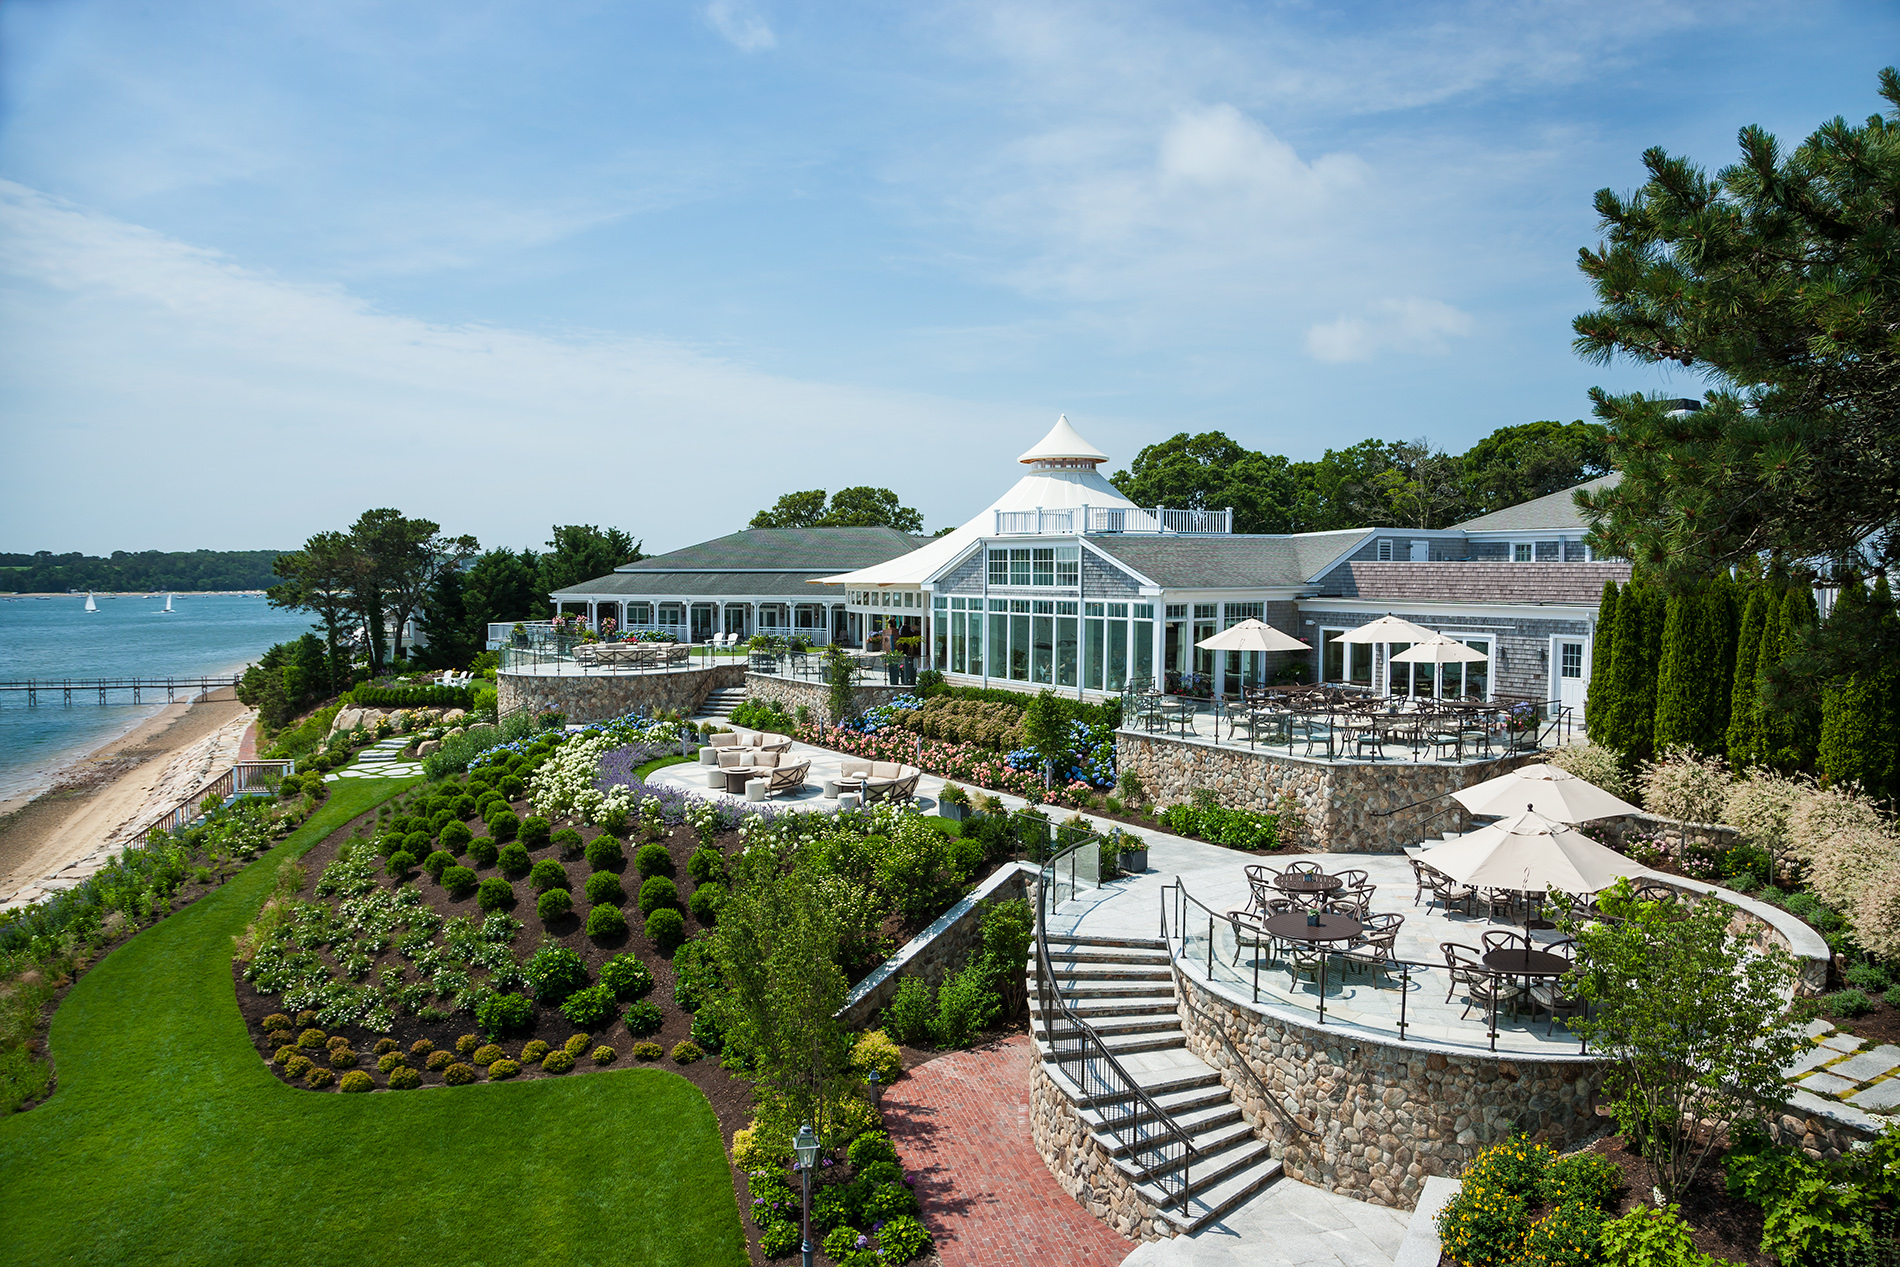 The team at the Wequassett Resort  Golf Club in Harwich Mass realized they were a 4-star hotel offering 5-star service H